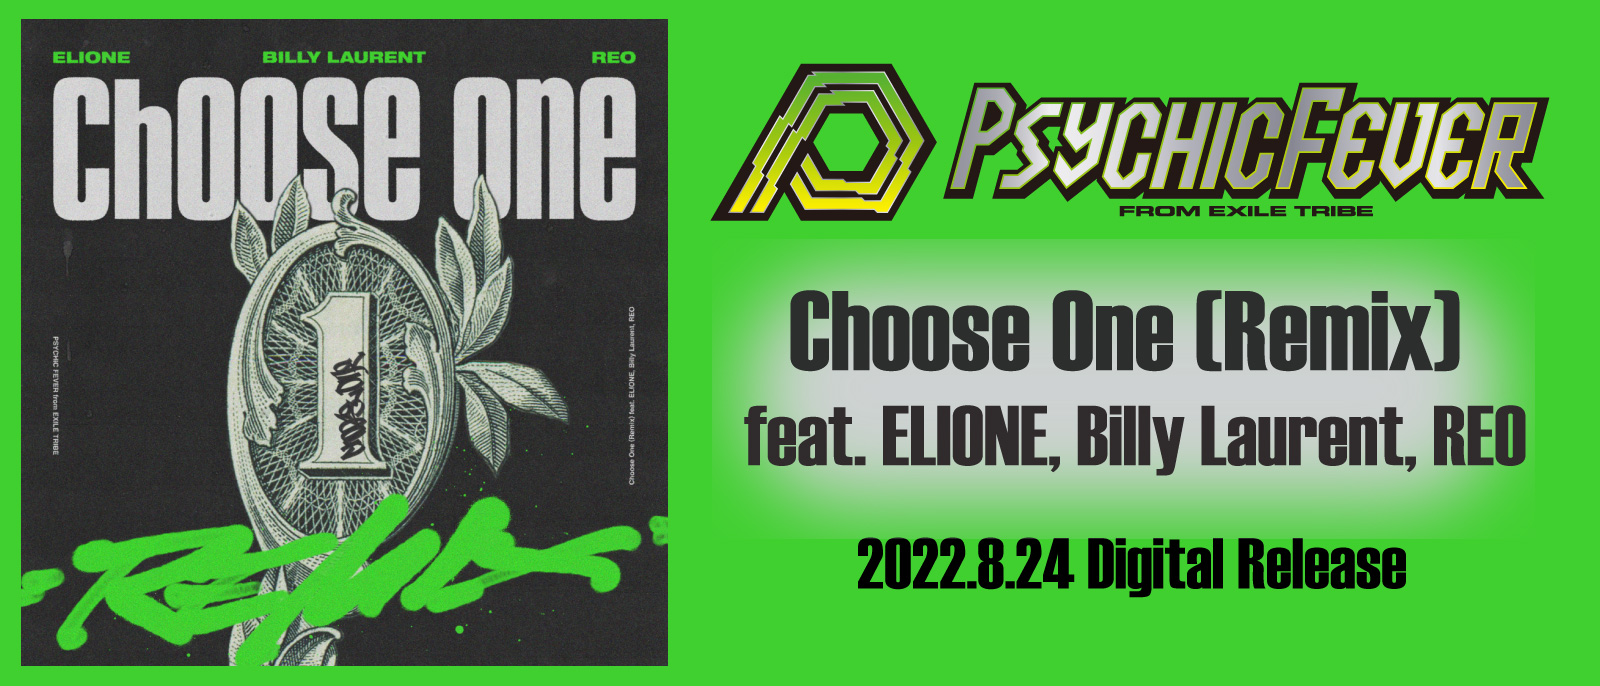 PSYCHIC FEVER from EXILE TRIBE 『Choose One (Remix) feat. ELIONE, Billy Laurent, REO』